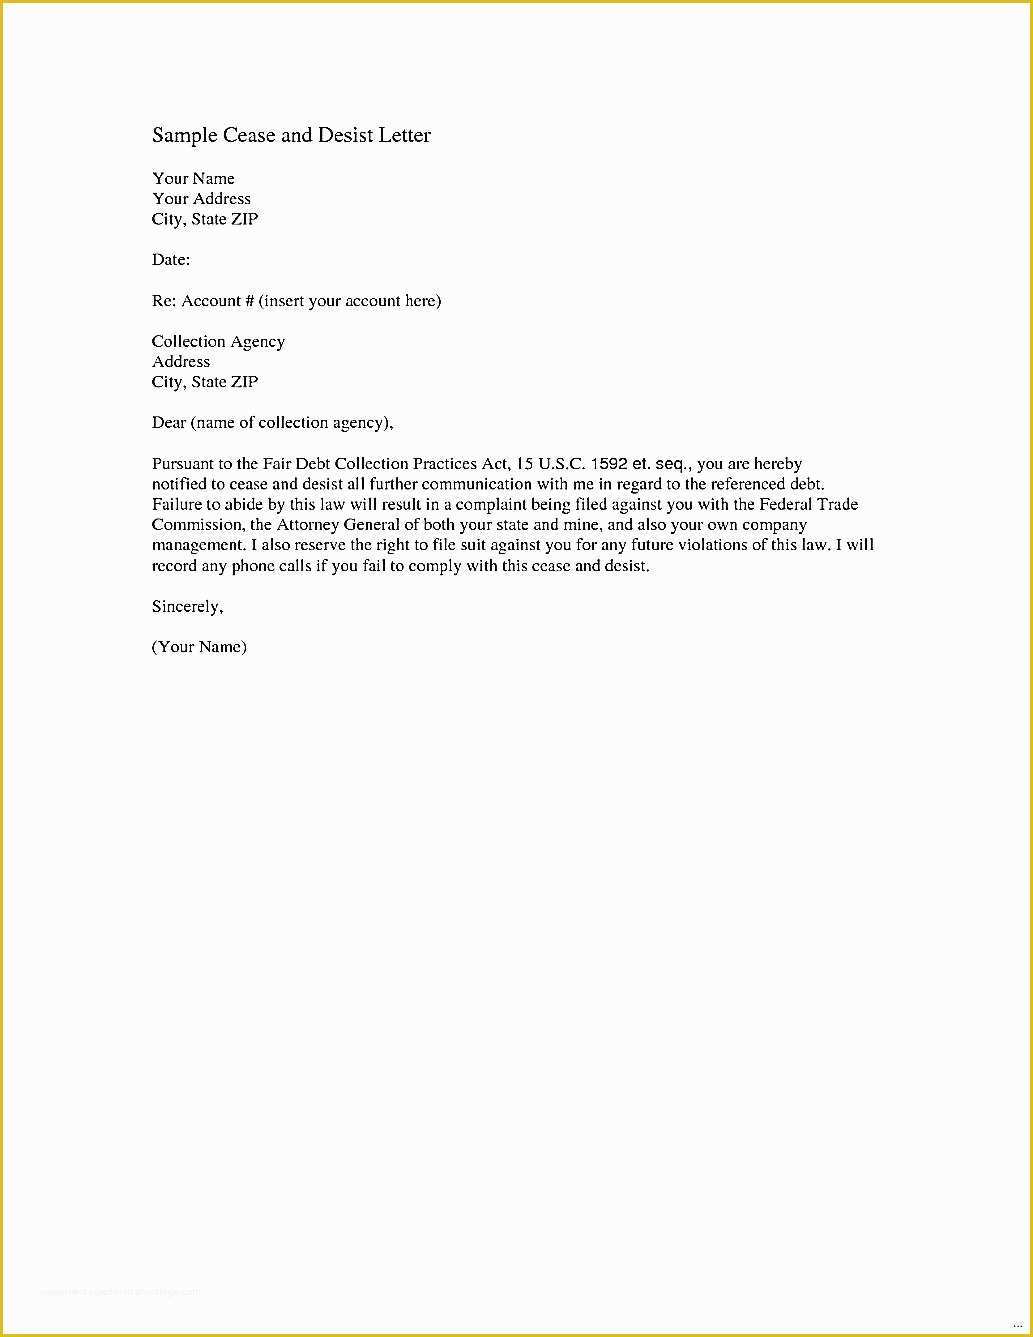 Free Cease and Desist Letter Template for Slander Of Cease and Desist Letter Slander Template